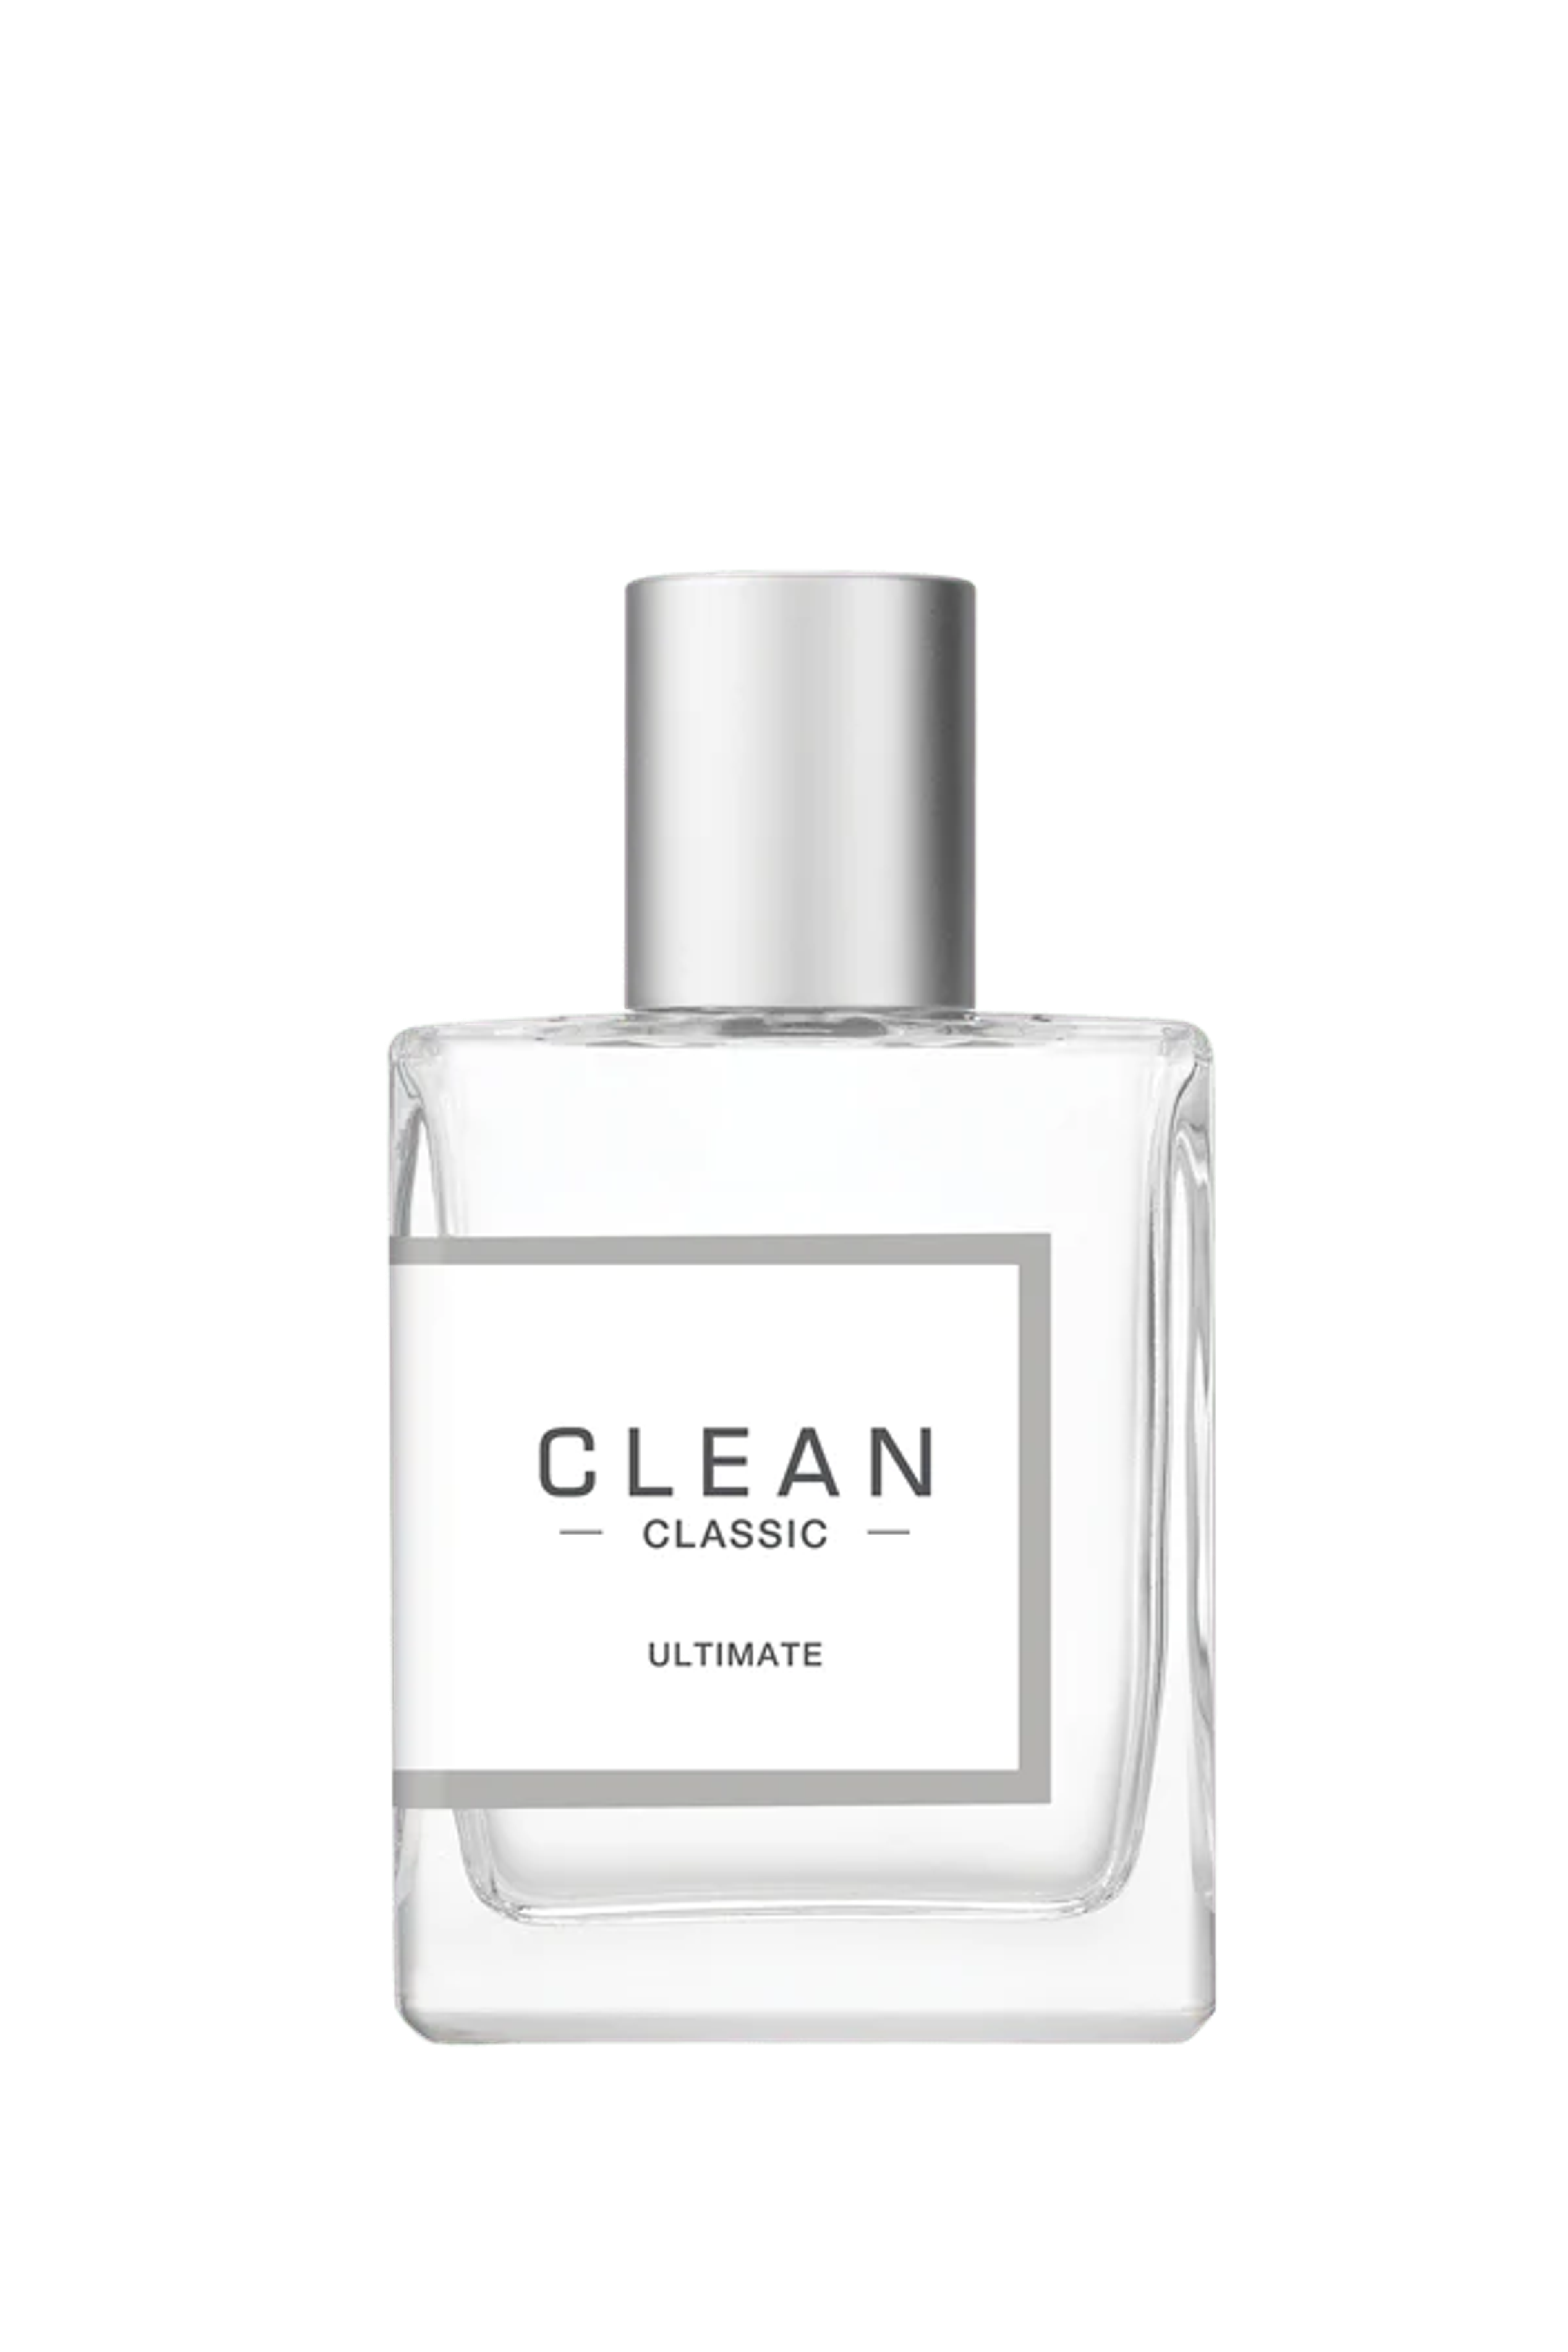 Clean Classic Ultimate | Clean Perfume by Clean Beauty Collective – CLEAN Beauty Collective